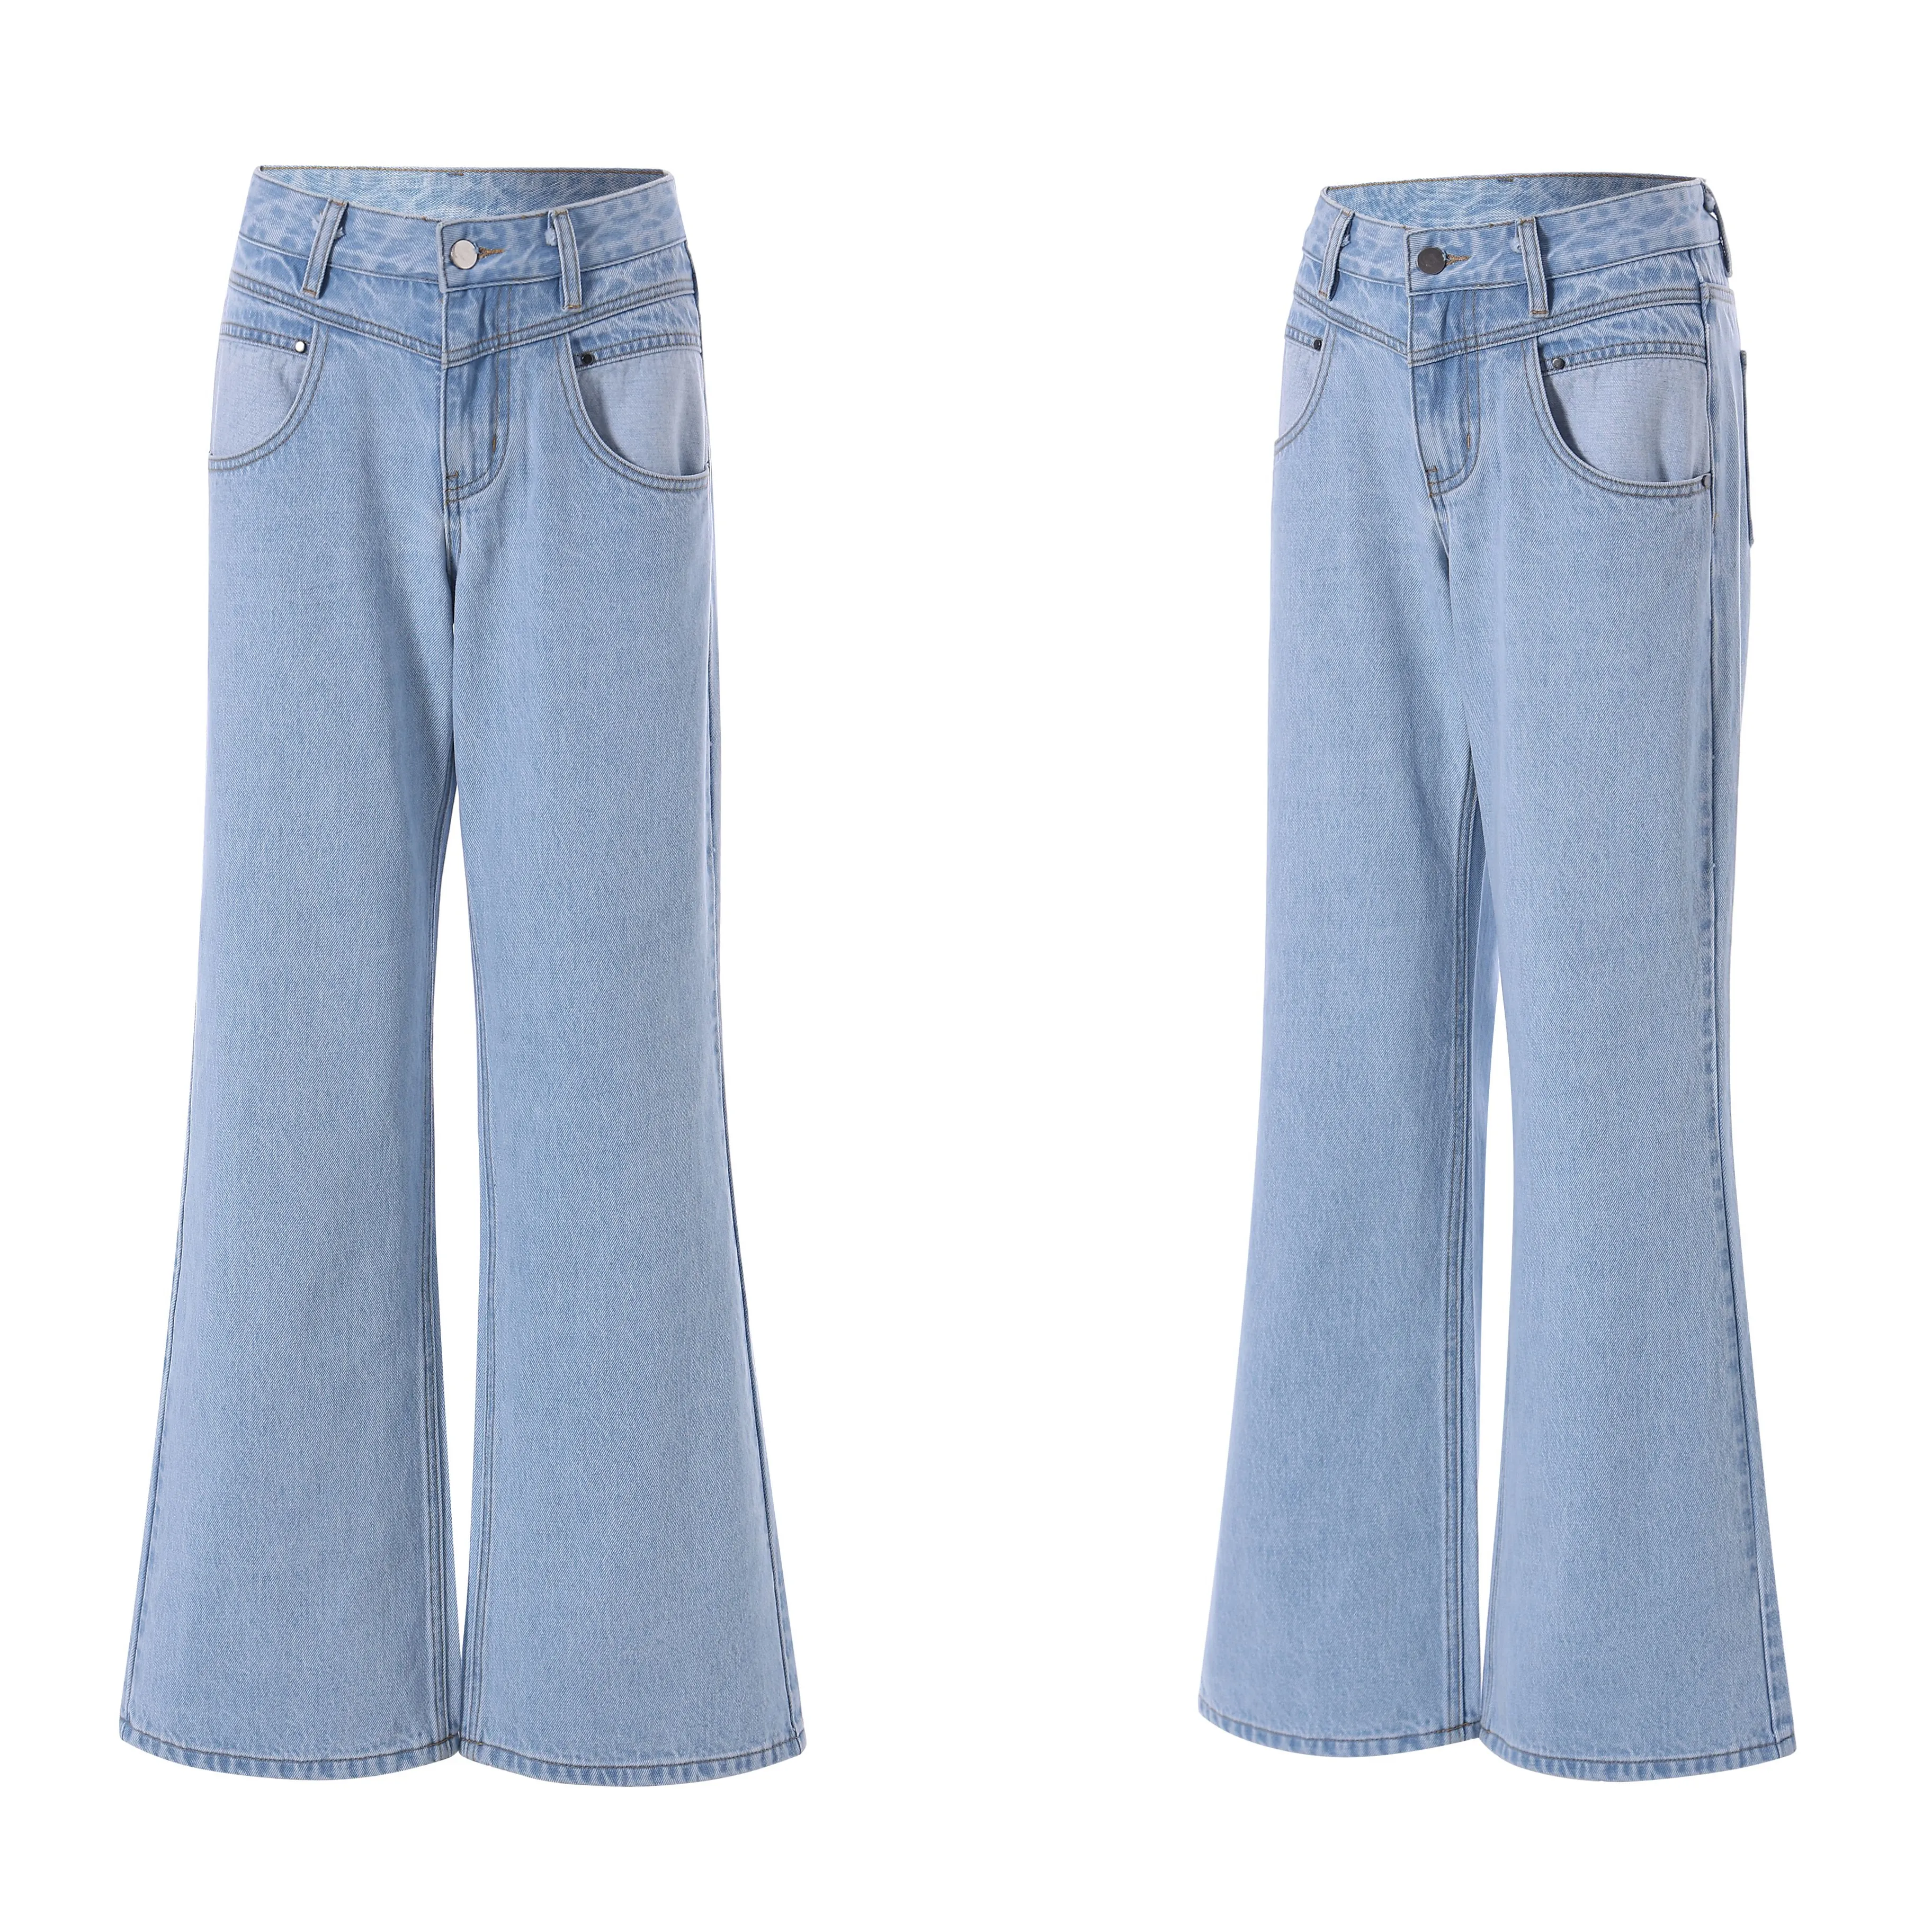 Baggy jeans custom Women's casual trousers Factory price High Quality jeans pants for women